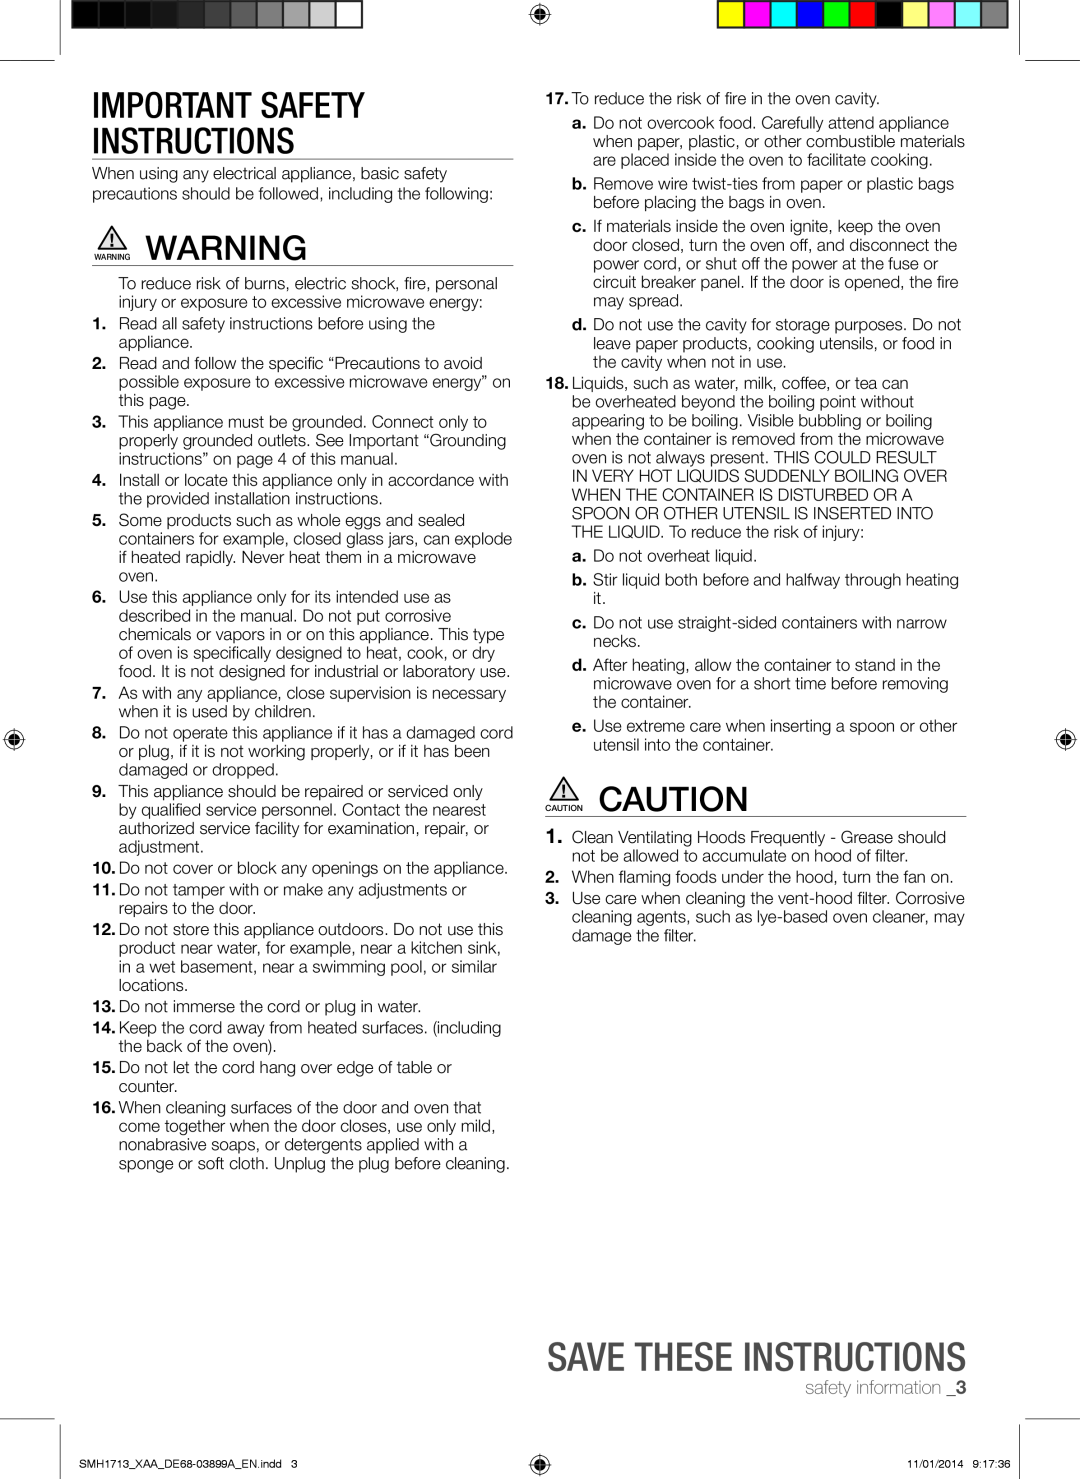 Samsung SMH1713 user manual Important Safety Instructions, Save these instructions, safety information 